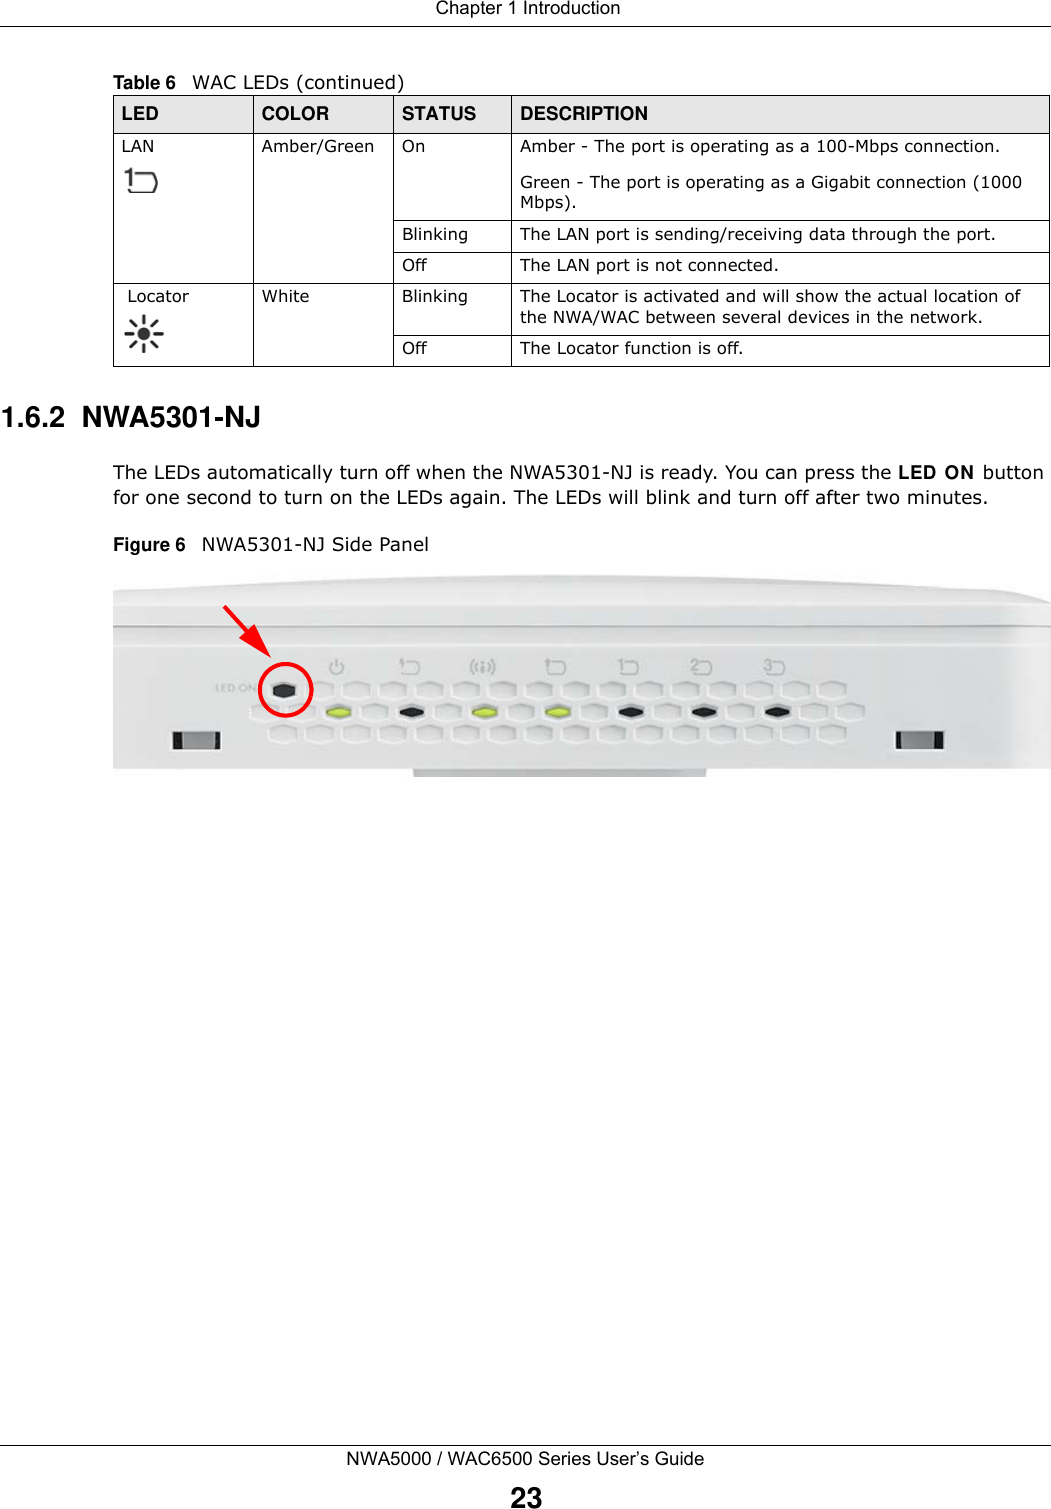  Chapter 1 IntroductionNWA5000 / WAC6500 Series User’s Guide231.6.2  NWA5301-NJThe LEDs automatically turn off when the NWA5301-NJ is ready. You can press the LED ON  button for one second to turn on the LEDs again. The LEDs will blink and turn off after two minutes.Figure 6   NWA5301-NJ Side Panel LAN Amber/Green On Amber - The port is operating as a 100-Mbps connection.Green - The port is operating as a Gigabit connection (1000 Mbps).Blinking The LAN port is sending/receiving data through the port.Off The LAN port is not connected. Locator White Blinking The Locator is activated and will show the actual location of the NWA/WAC between several devices in the network.Off The Locator function is off.Table 6   WAC LEDs (continued)LED COLOR STATUS DESCRIPTION